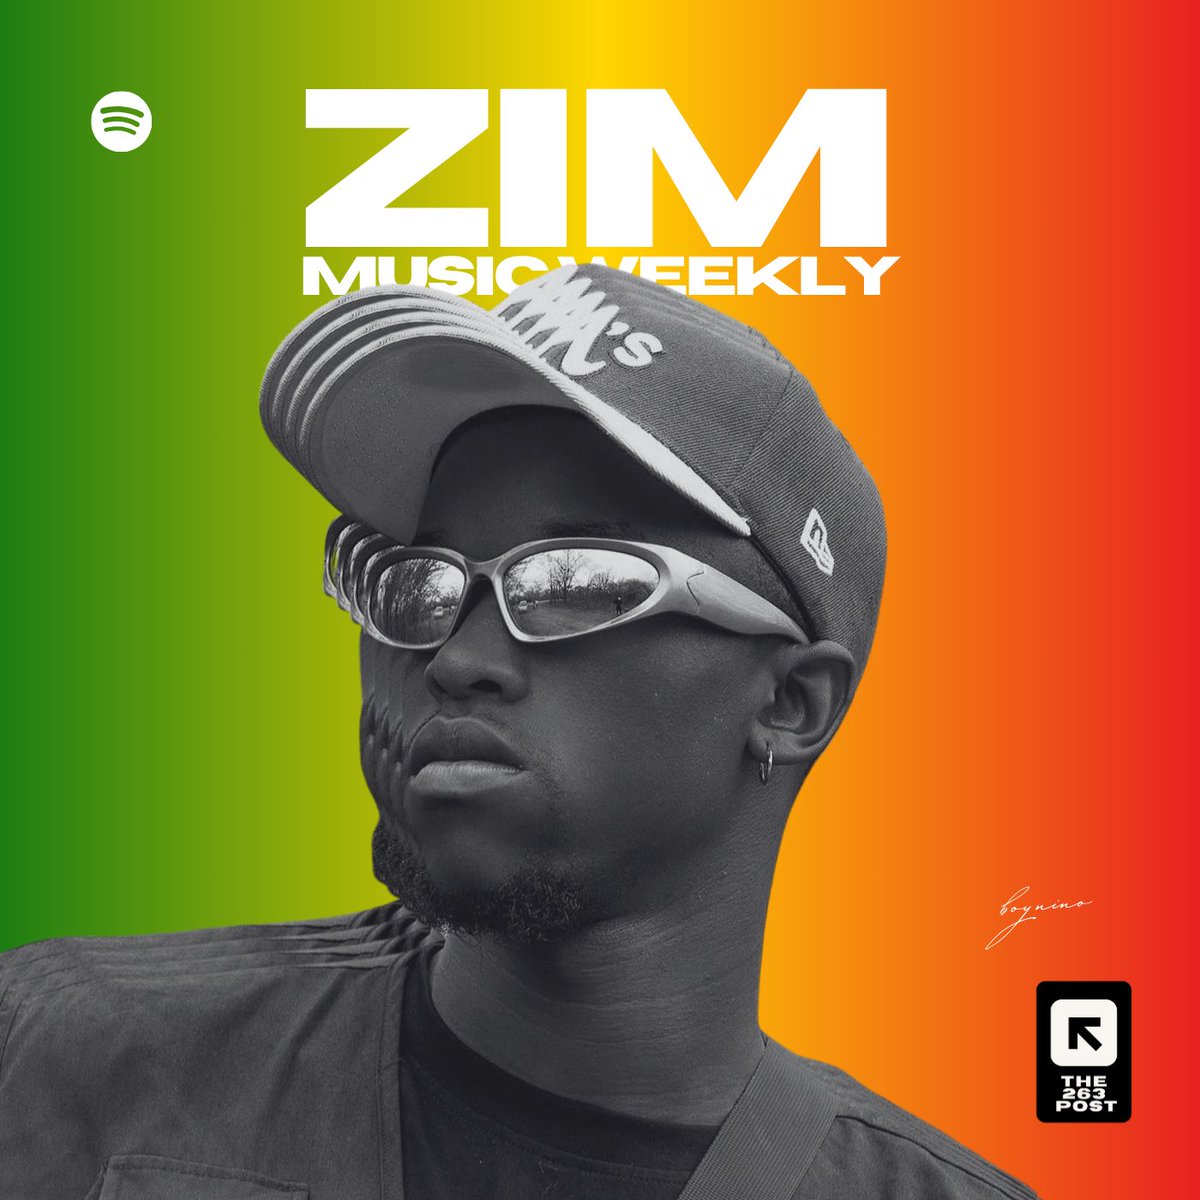 Zim Music Weekly is a weekly playlist featuring the best of Zimbabwean music, giving you a taste of the country's diverse soundscape. Cover Artist | Boy Nino Stream | spotify.link/Tx3PCARVazb